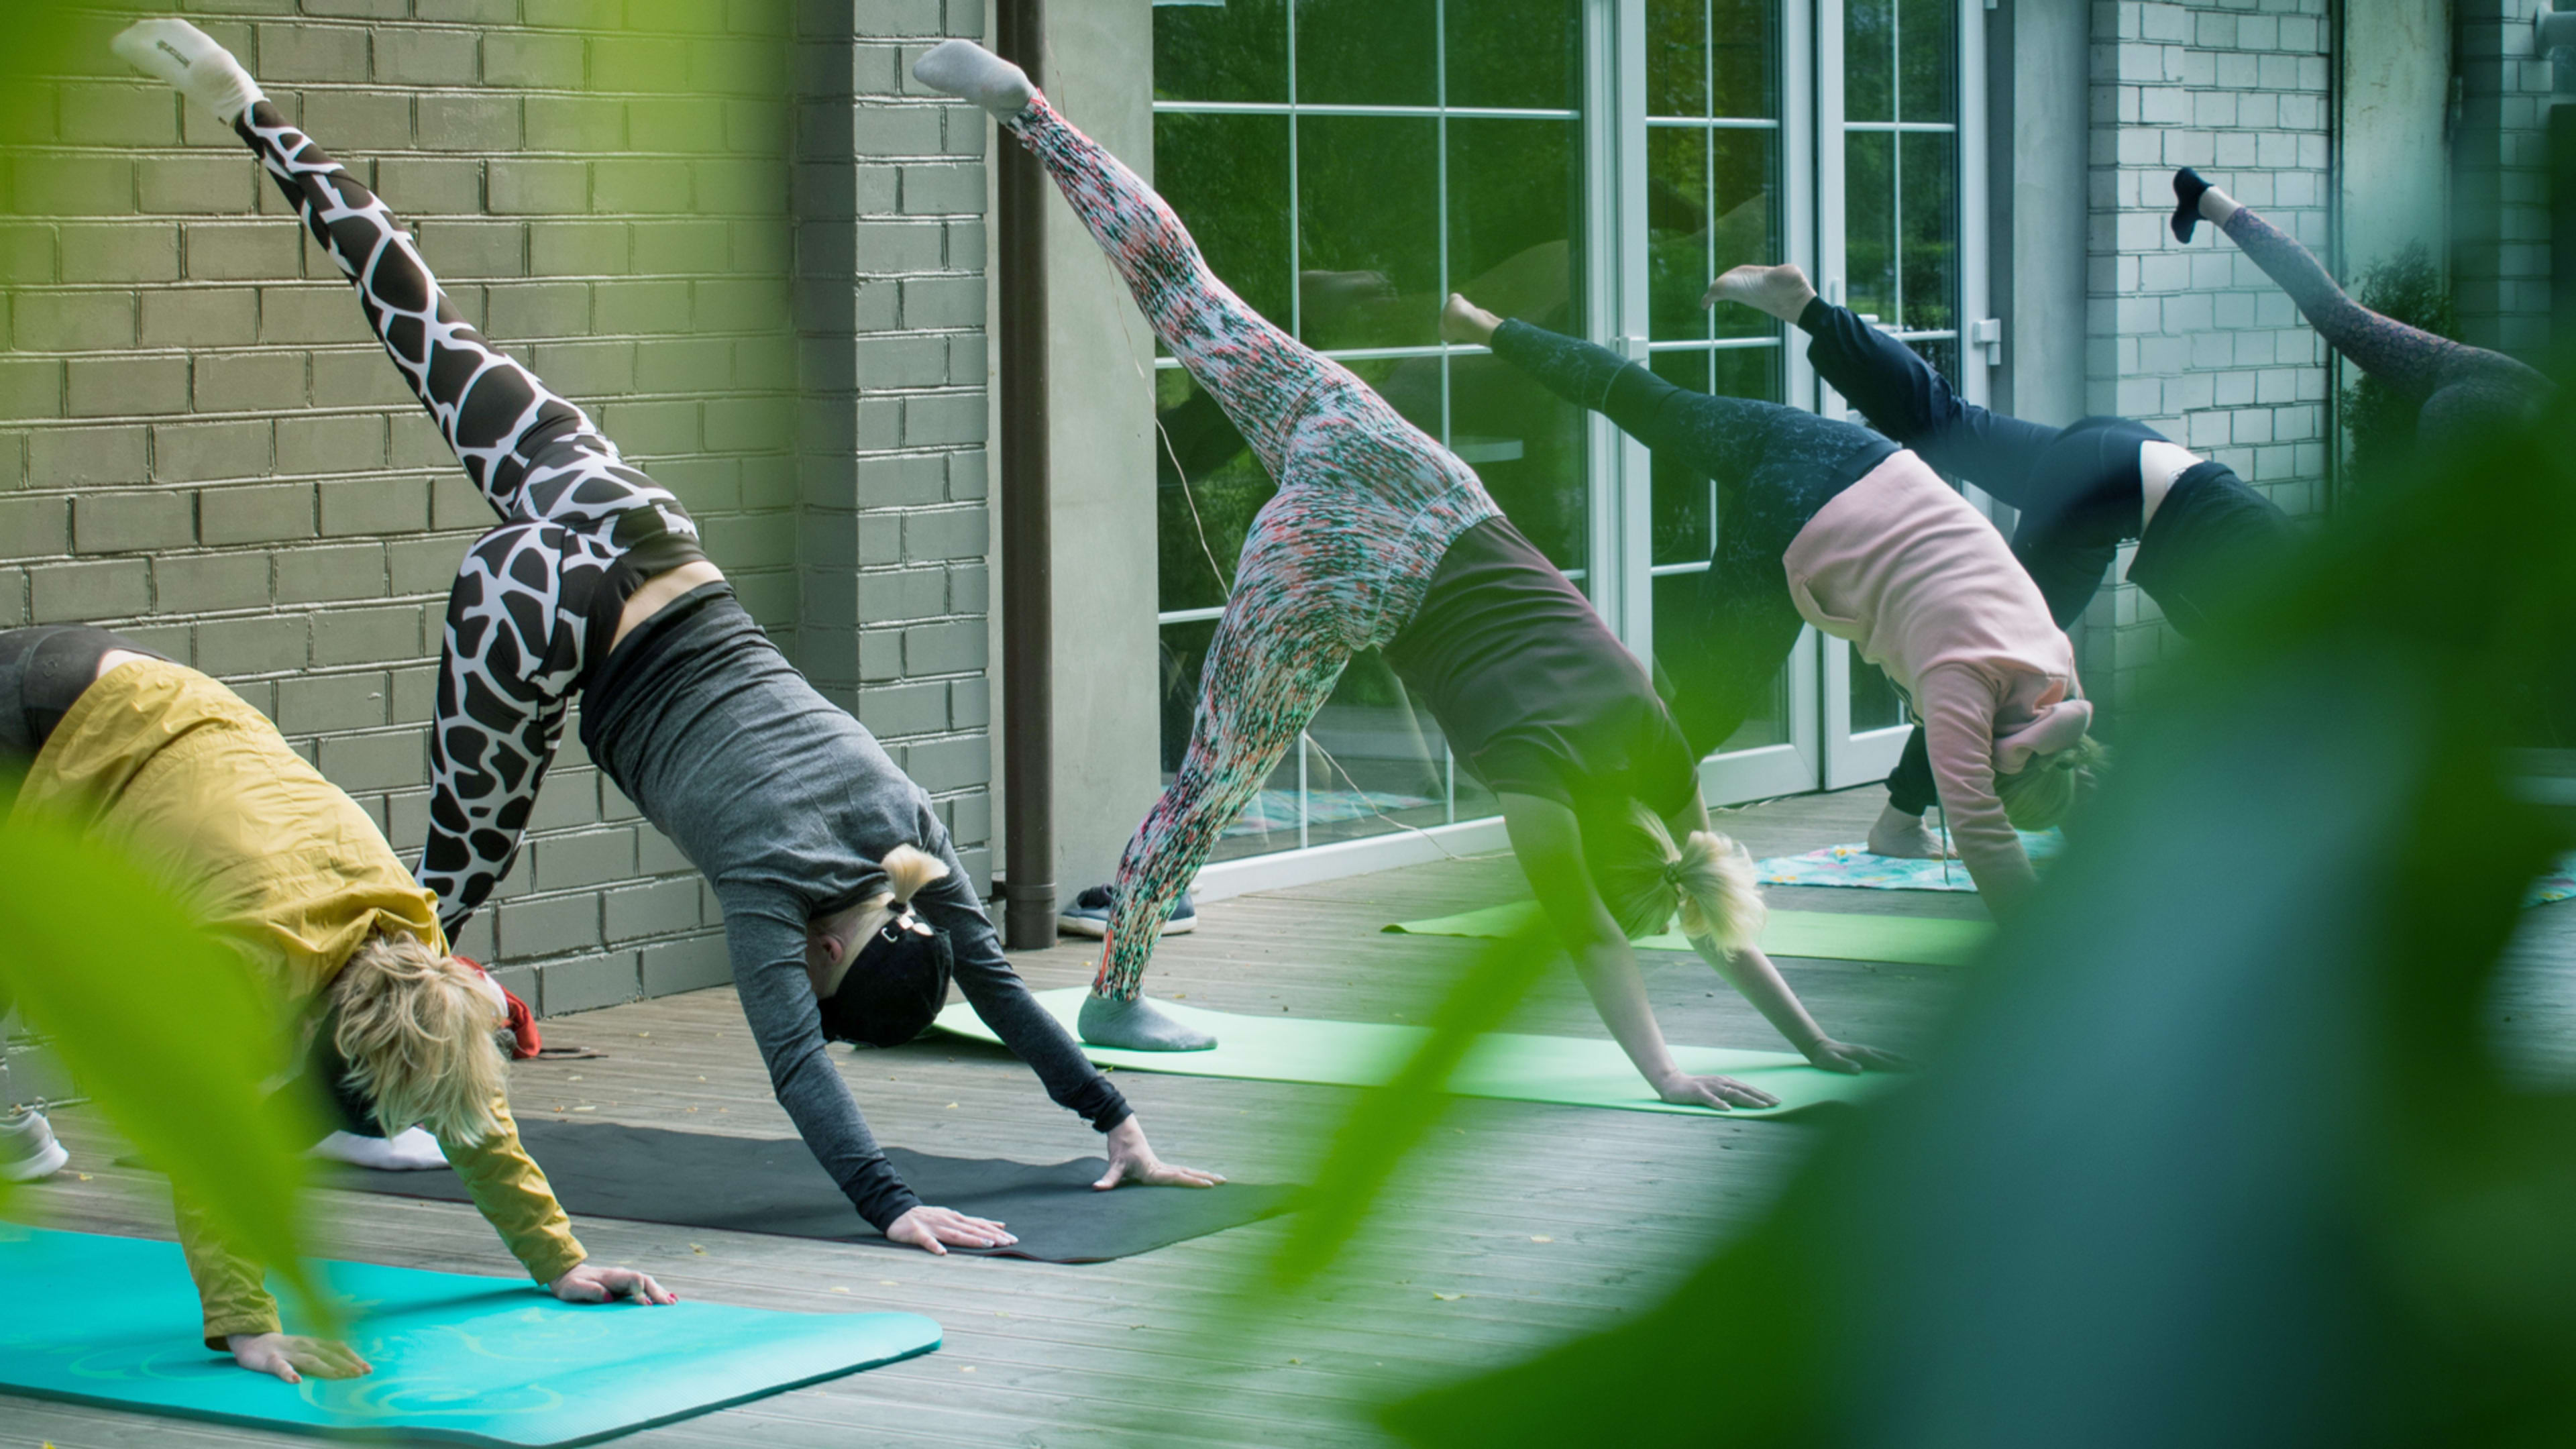 These 10 market trends turned wellness into a $4.2 trillion global industry